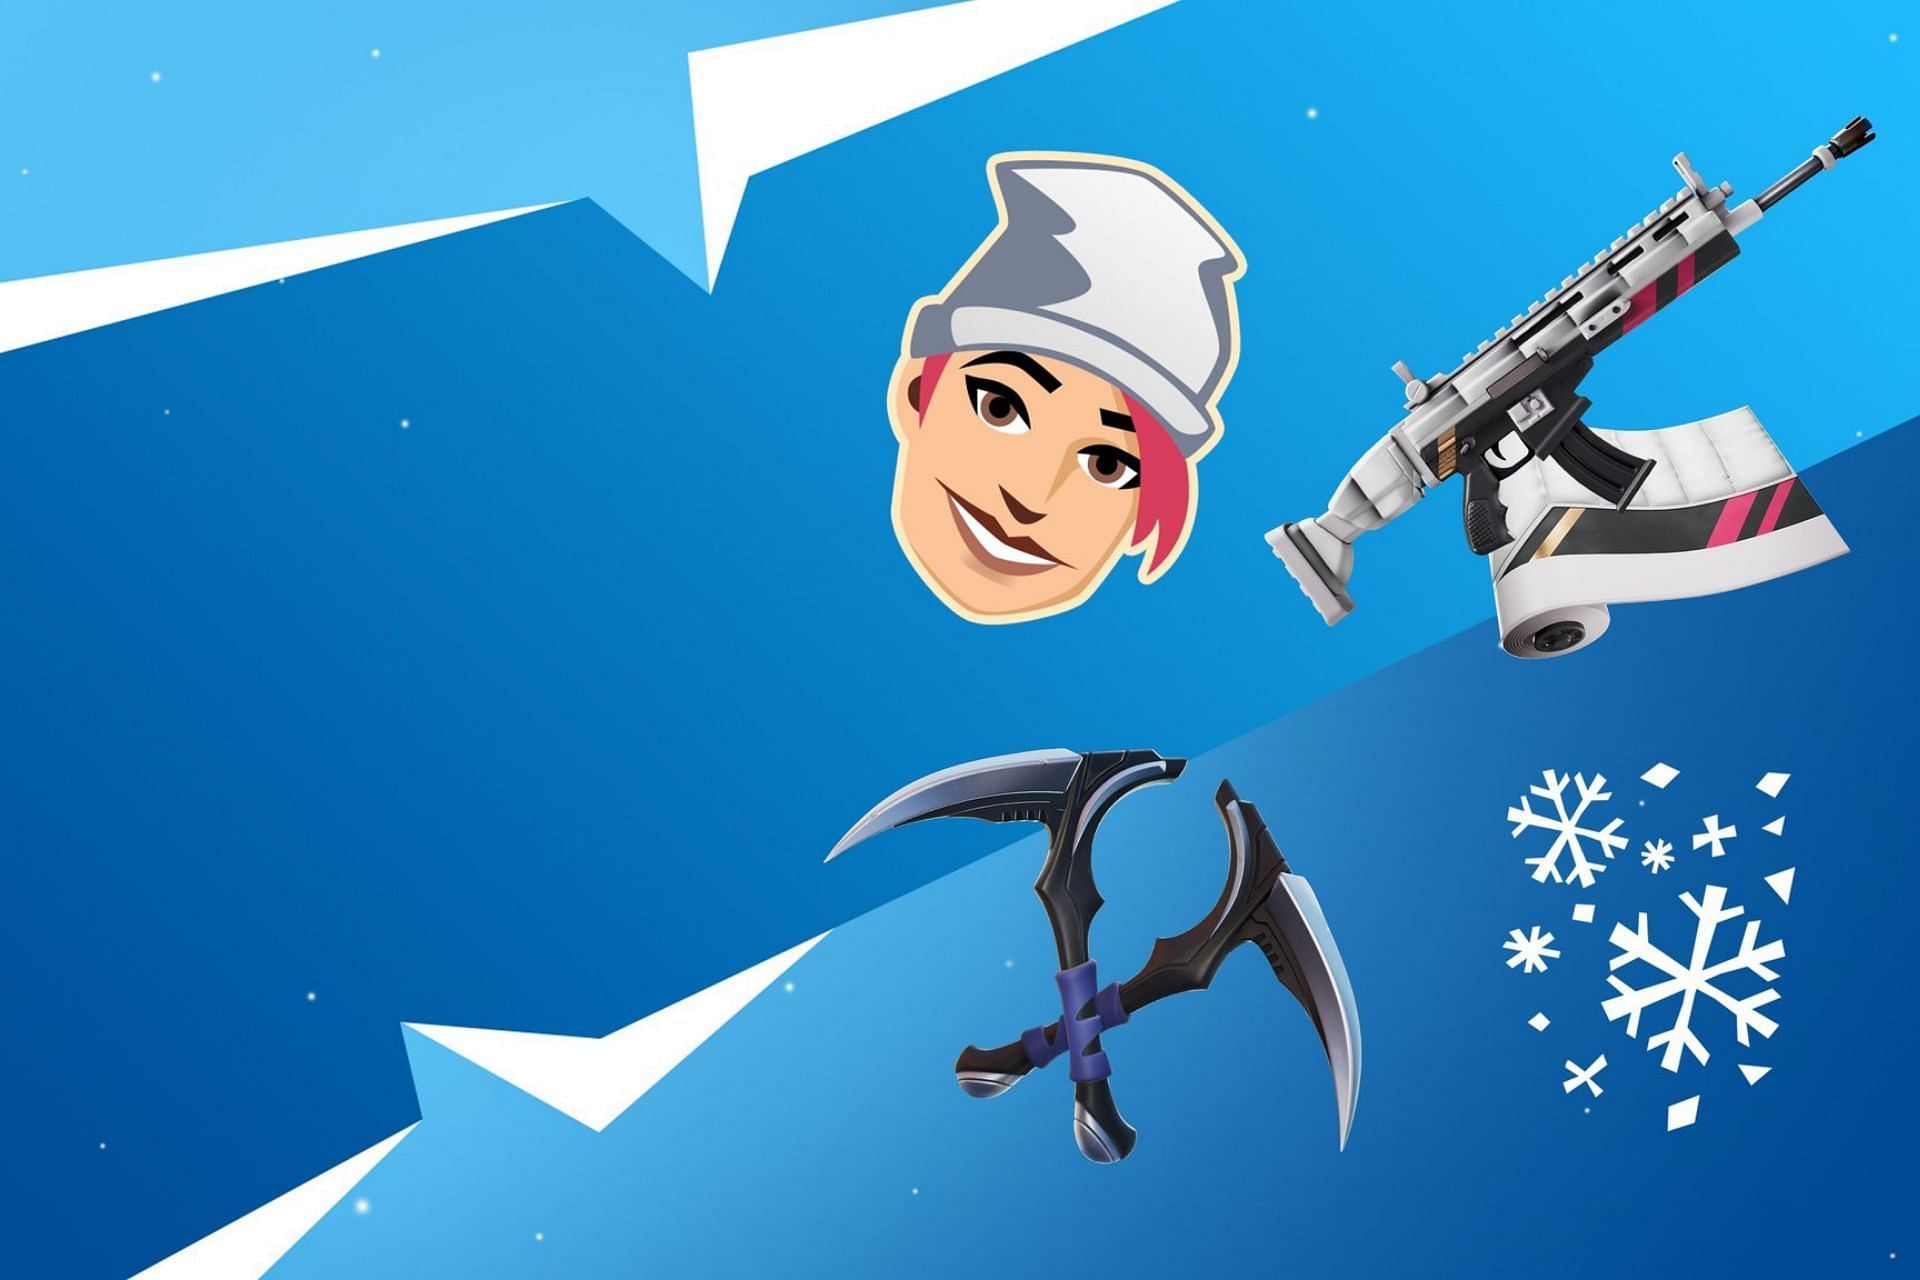 Players with PlayStation Plus subscriptions can avail free cosmetics as from the PlayStation Celebration Pack (Image via Epic games)